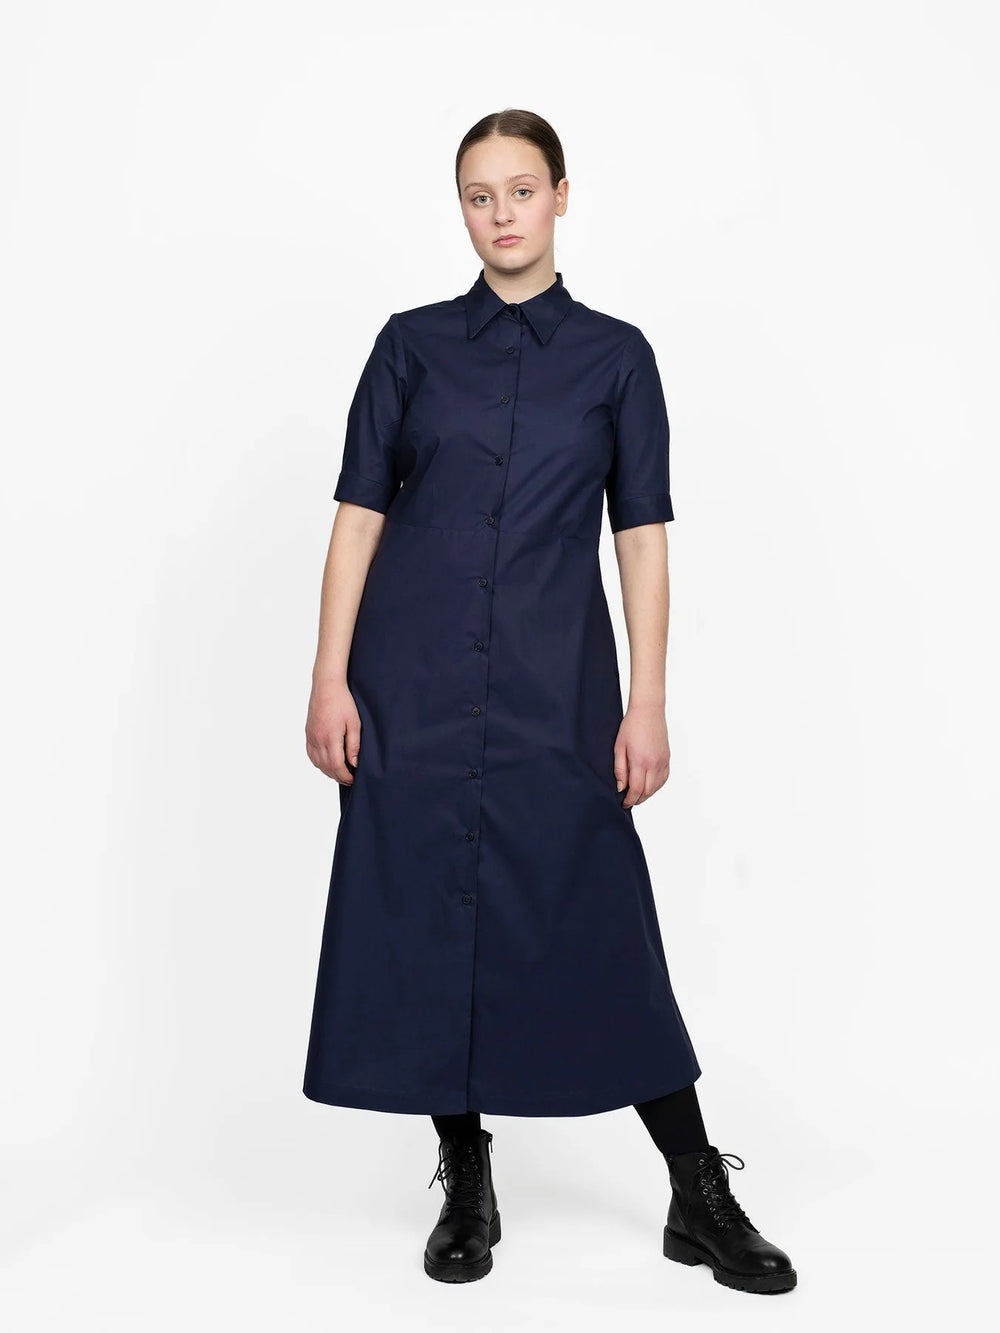 Woman wearing the Shirt Dress sewing pattern from The Assembly Line on The Fold Line. A shirt dress pattern made in cotton, tencel, silk, lawn, linen, crepe de chine or wool crepe fabrics, featuring a slight A-line silhouette, mid-calf length, regular col